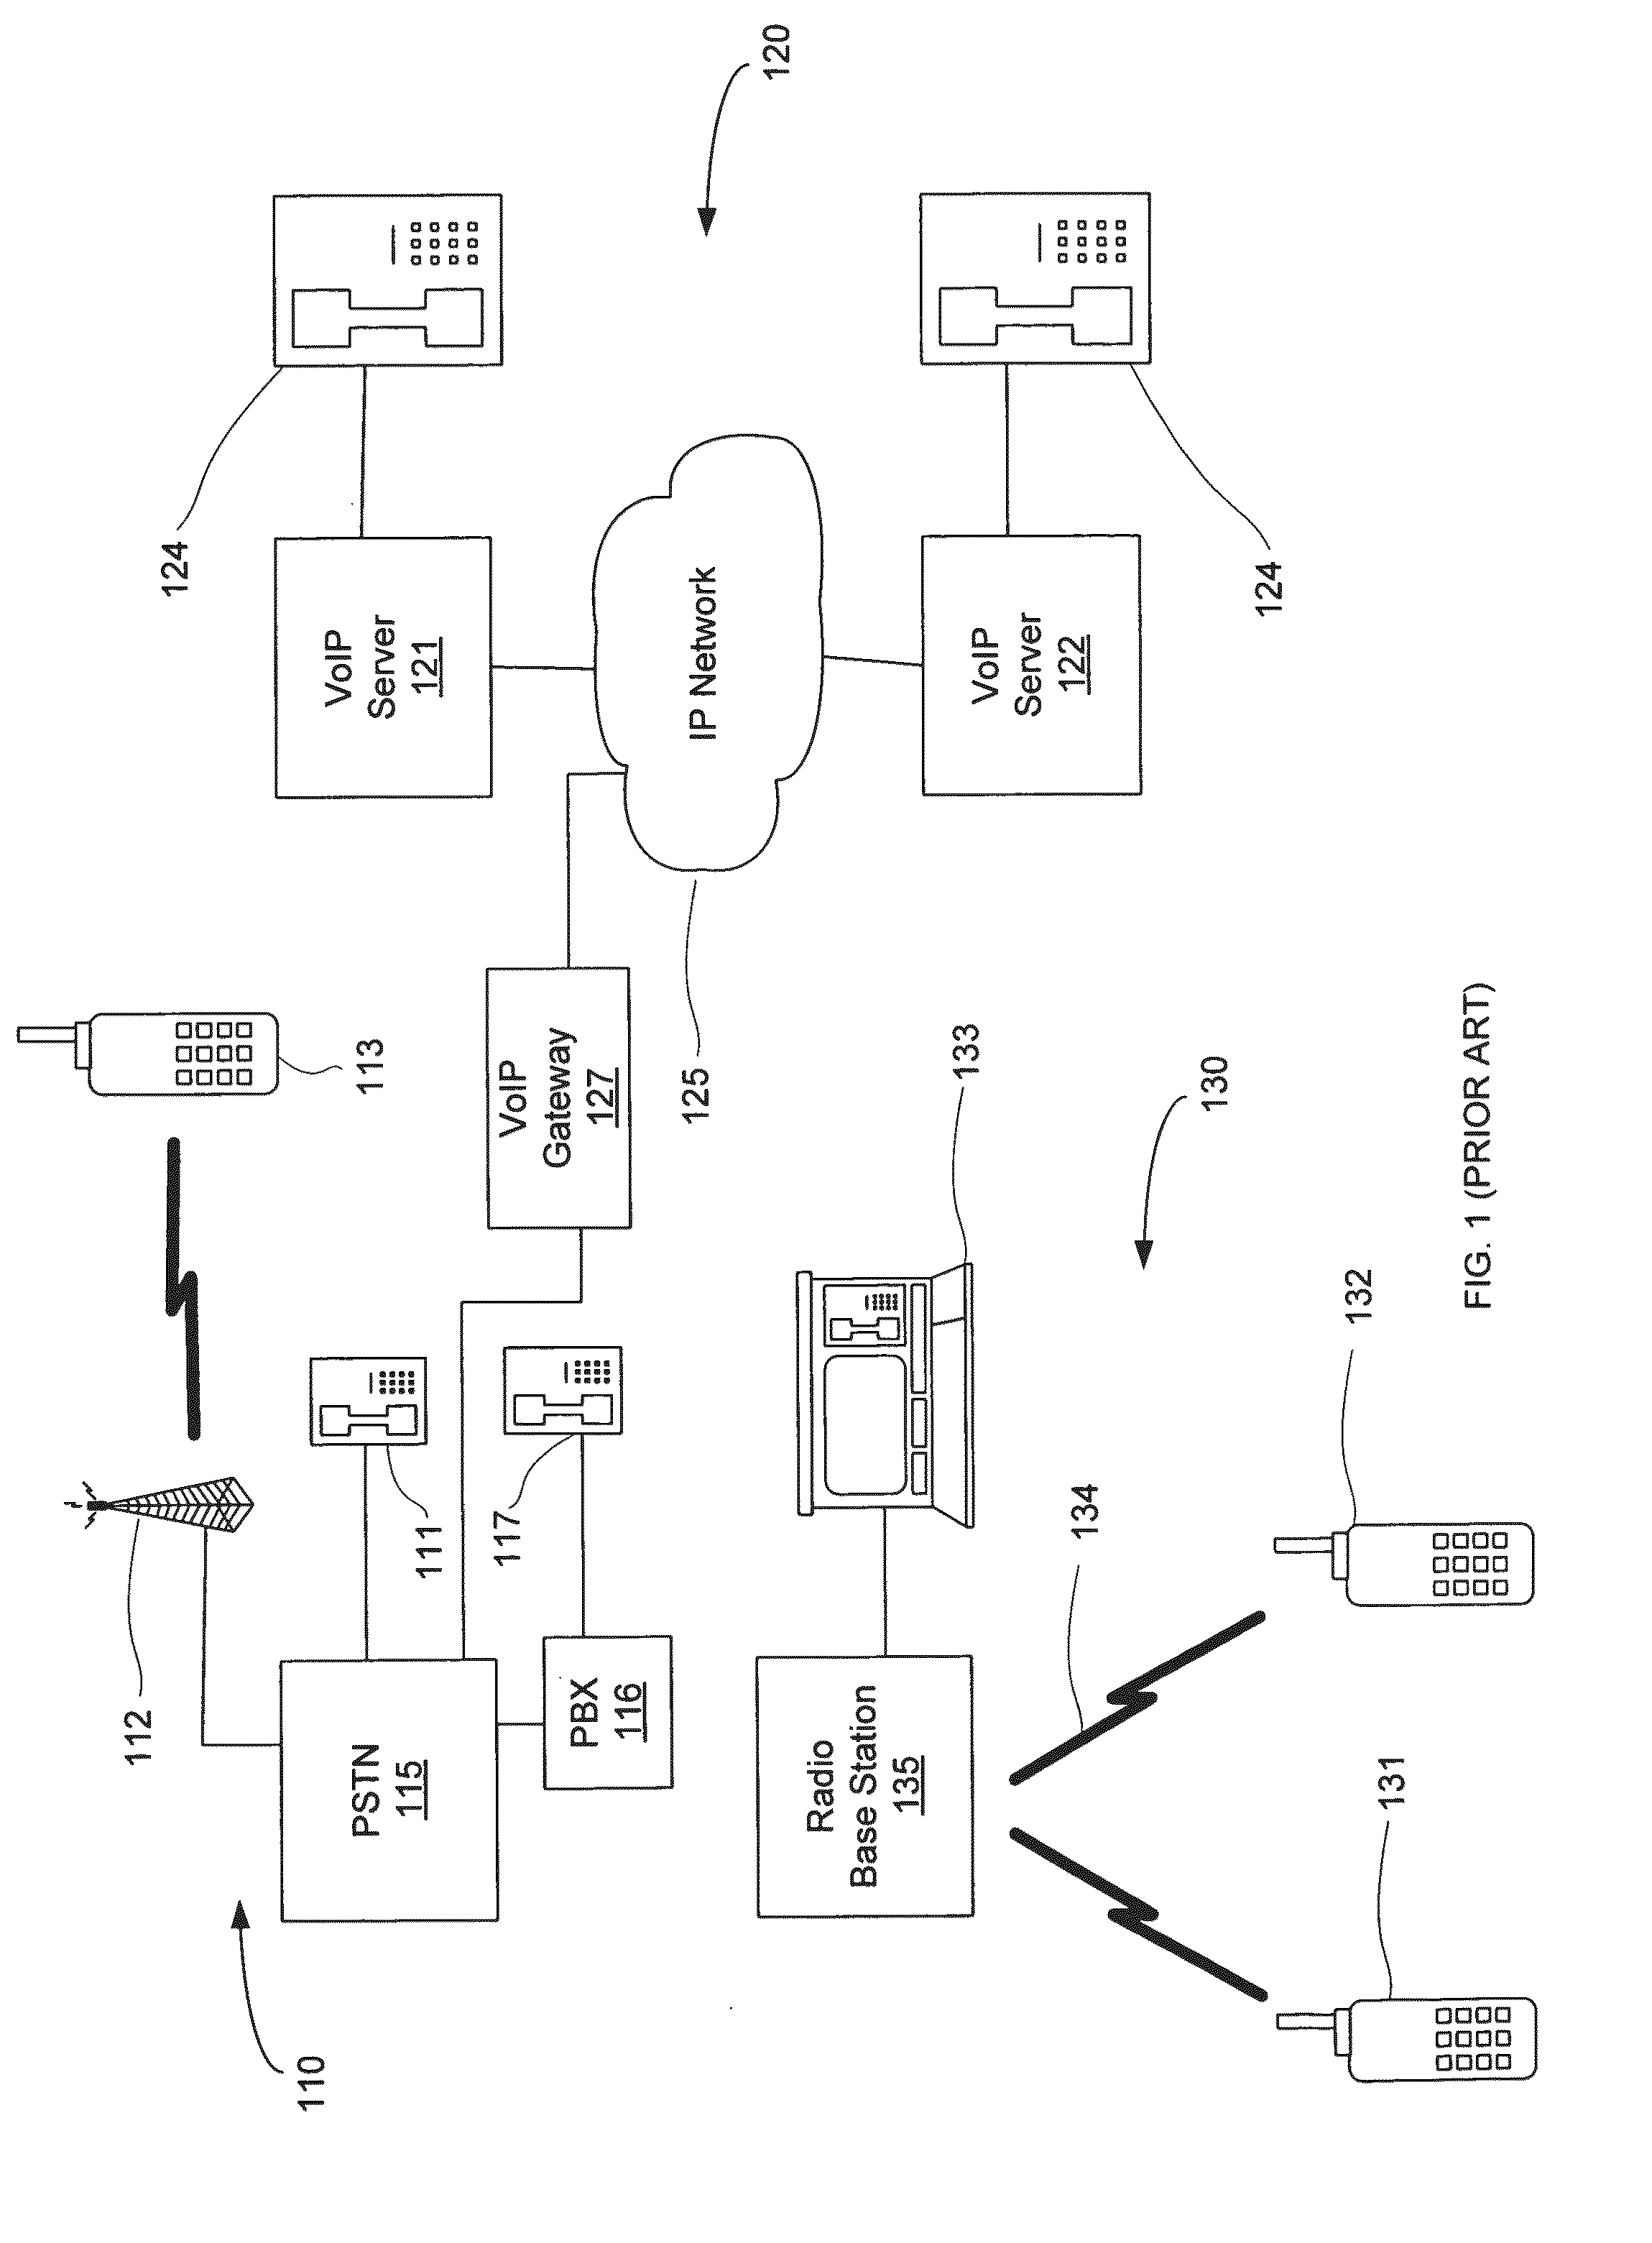 System and Method for Communications in a Multi-Platform Environment